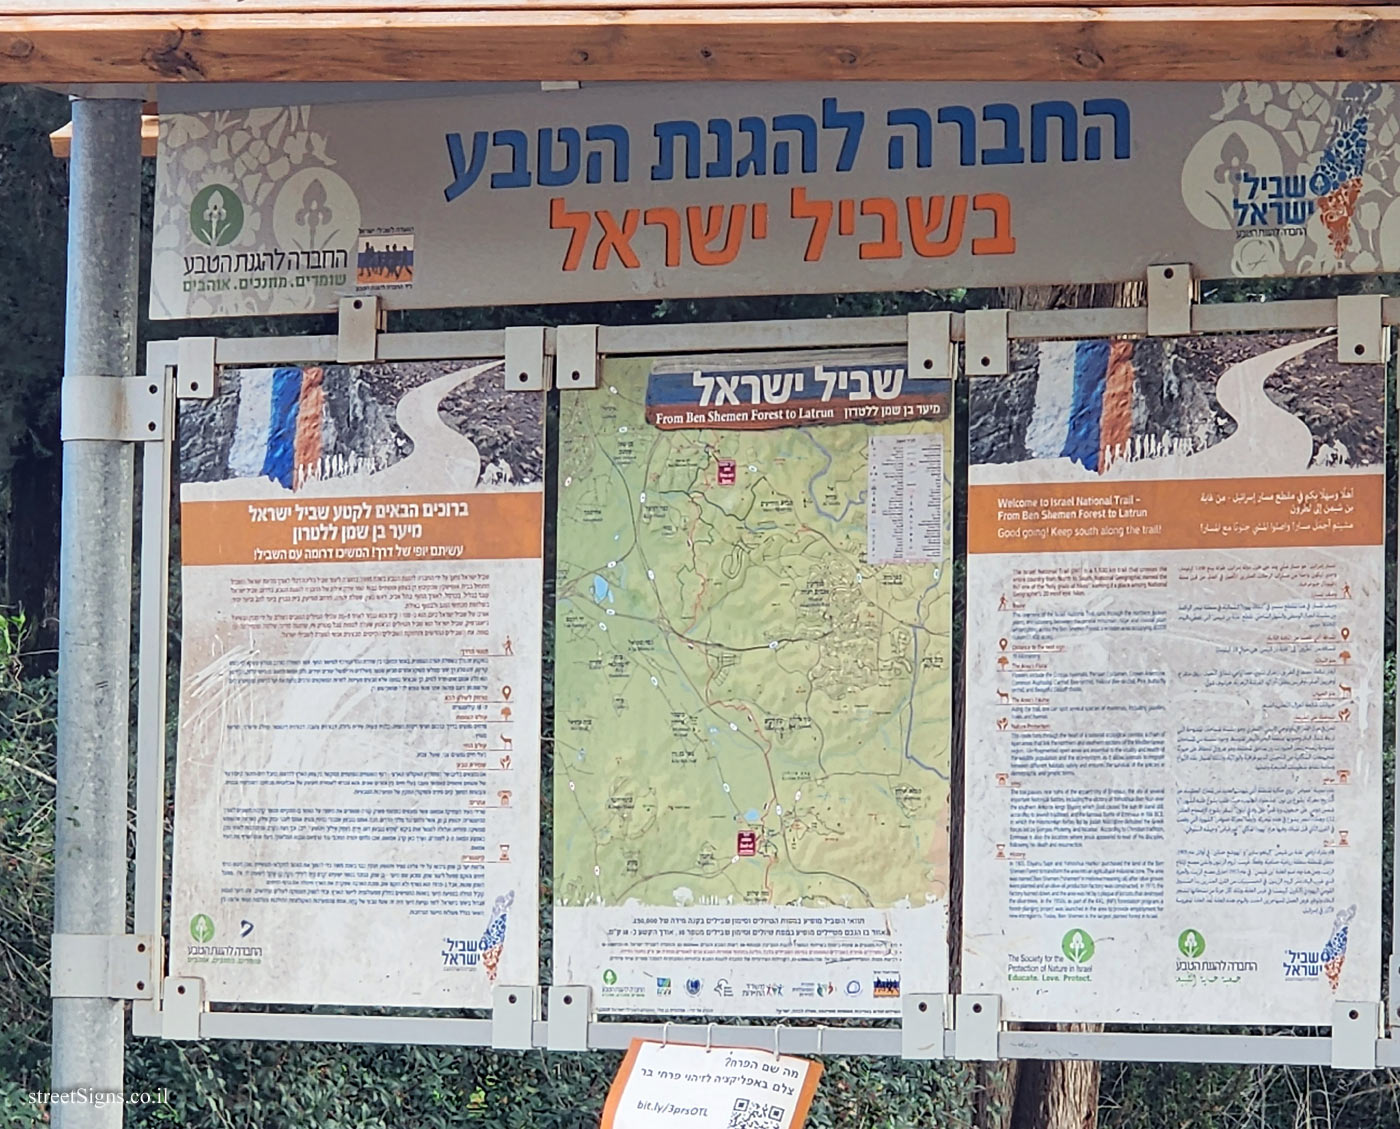 Israel National Trail - From Ben Shemen Forest to Latrun